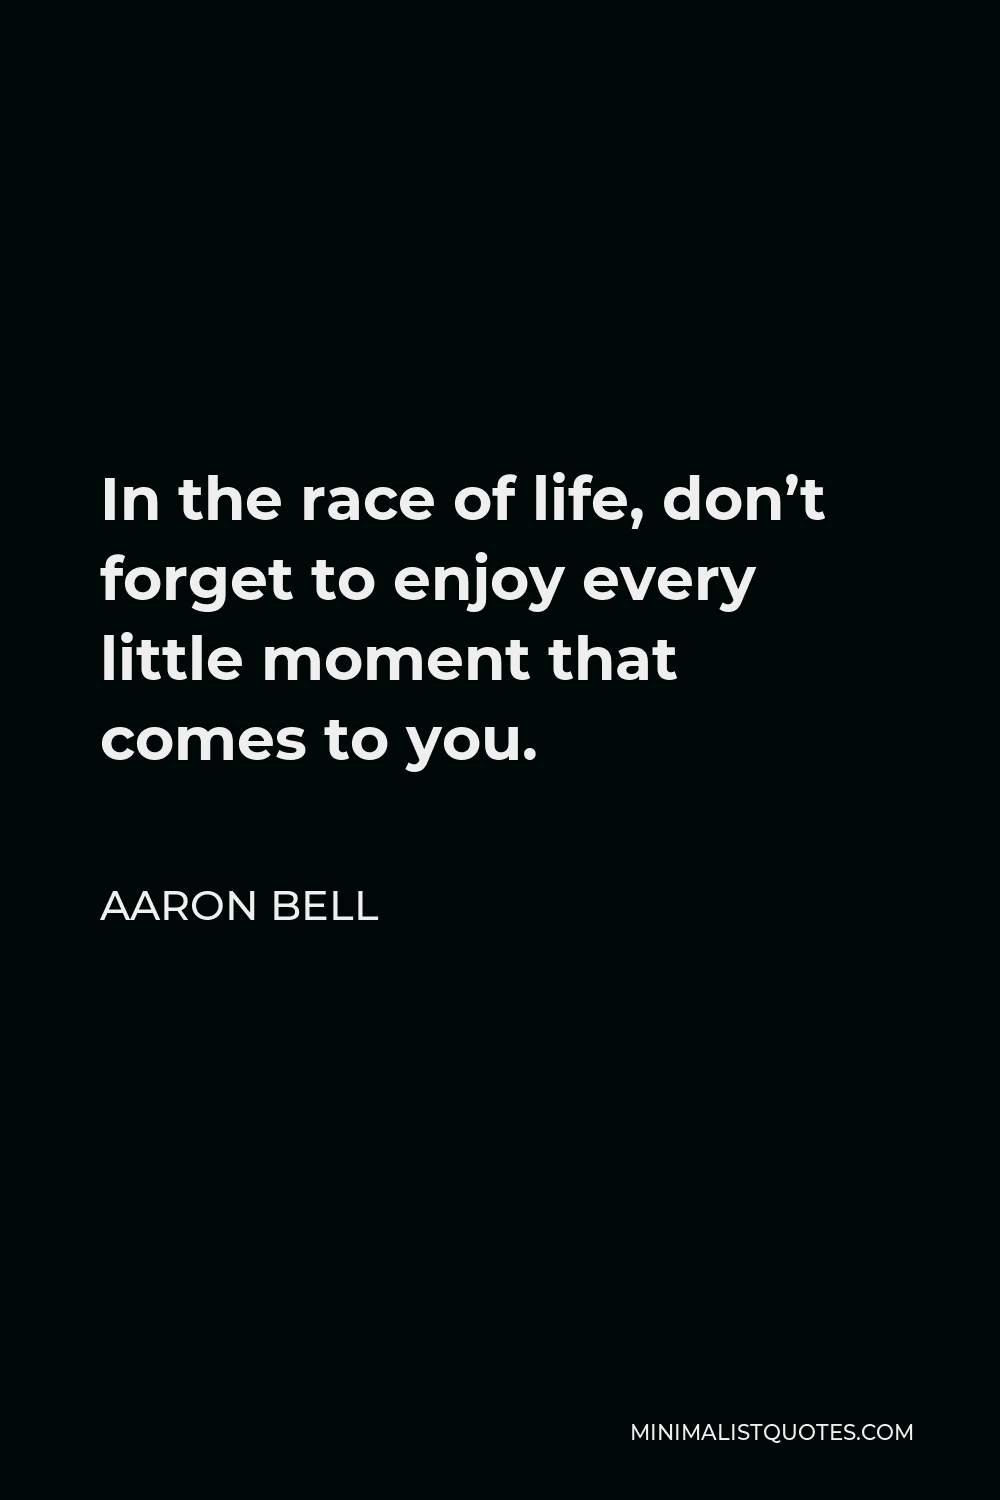 Aaron Bell Quote - In the race of life, don’t forget to enjoy every little moment that comes to you.